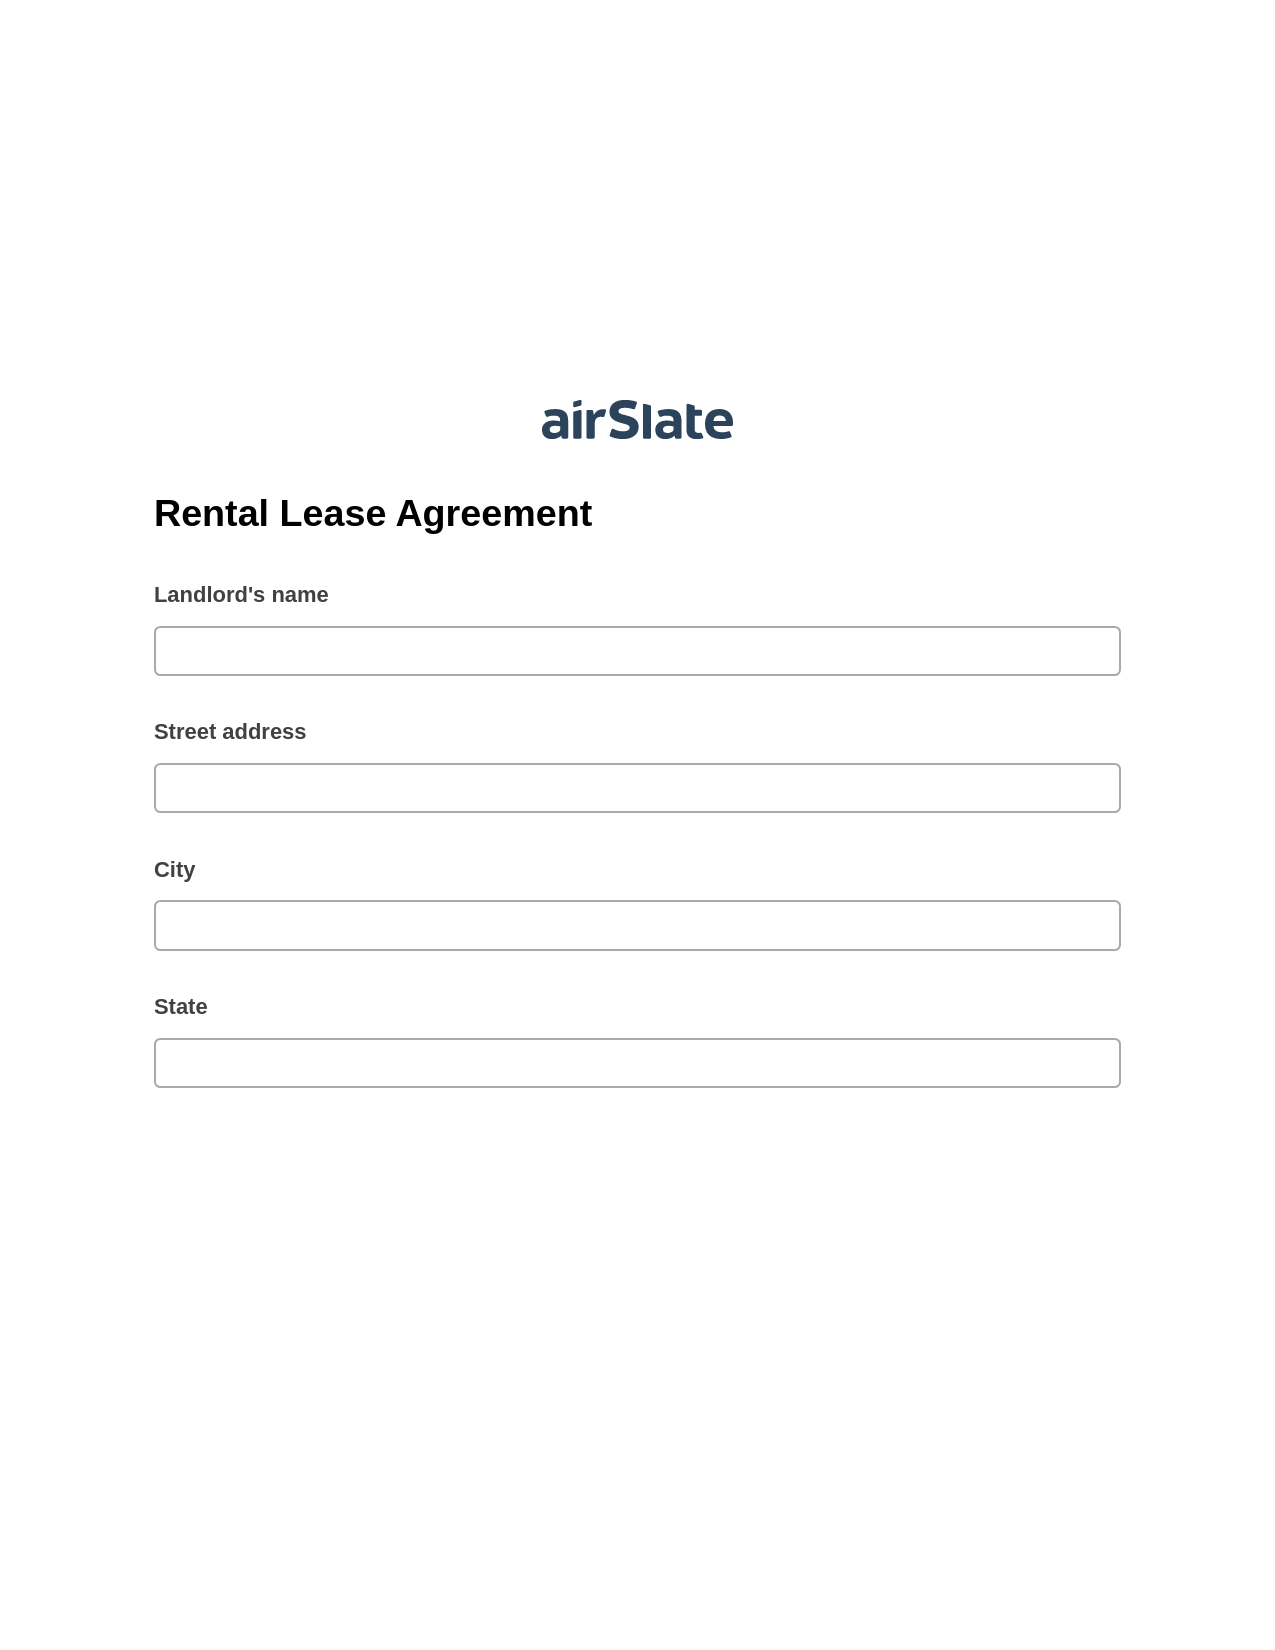 Rental Lease Agreement Pre-fill from Google Sheets Bot, Invoke Salesforce Process Bot, Export to Salesforce Bot